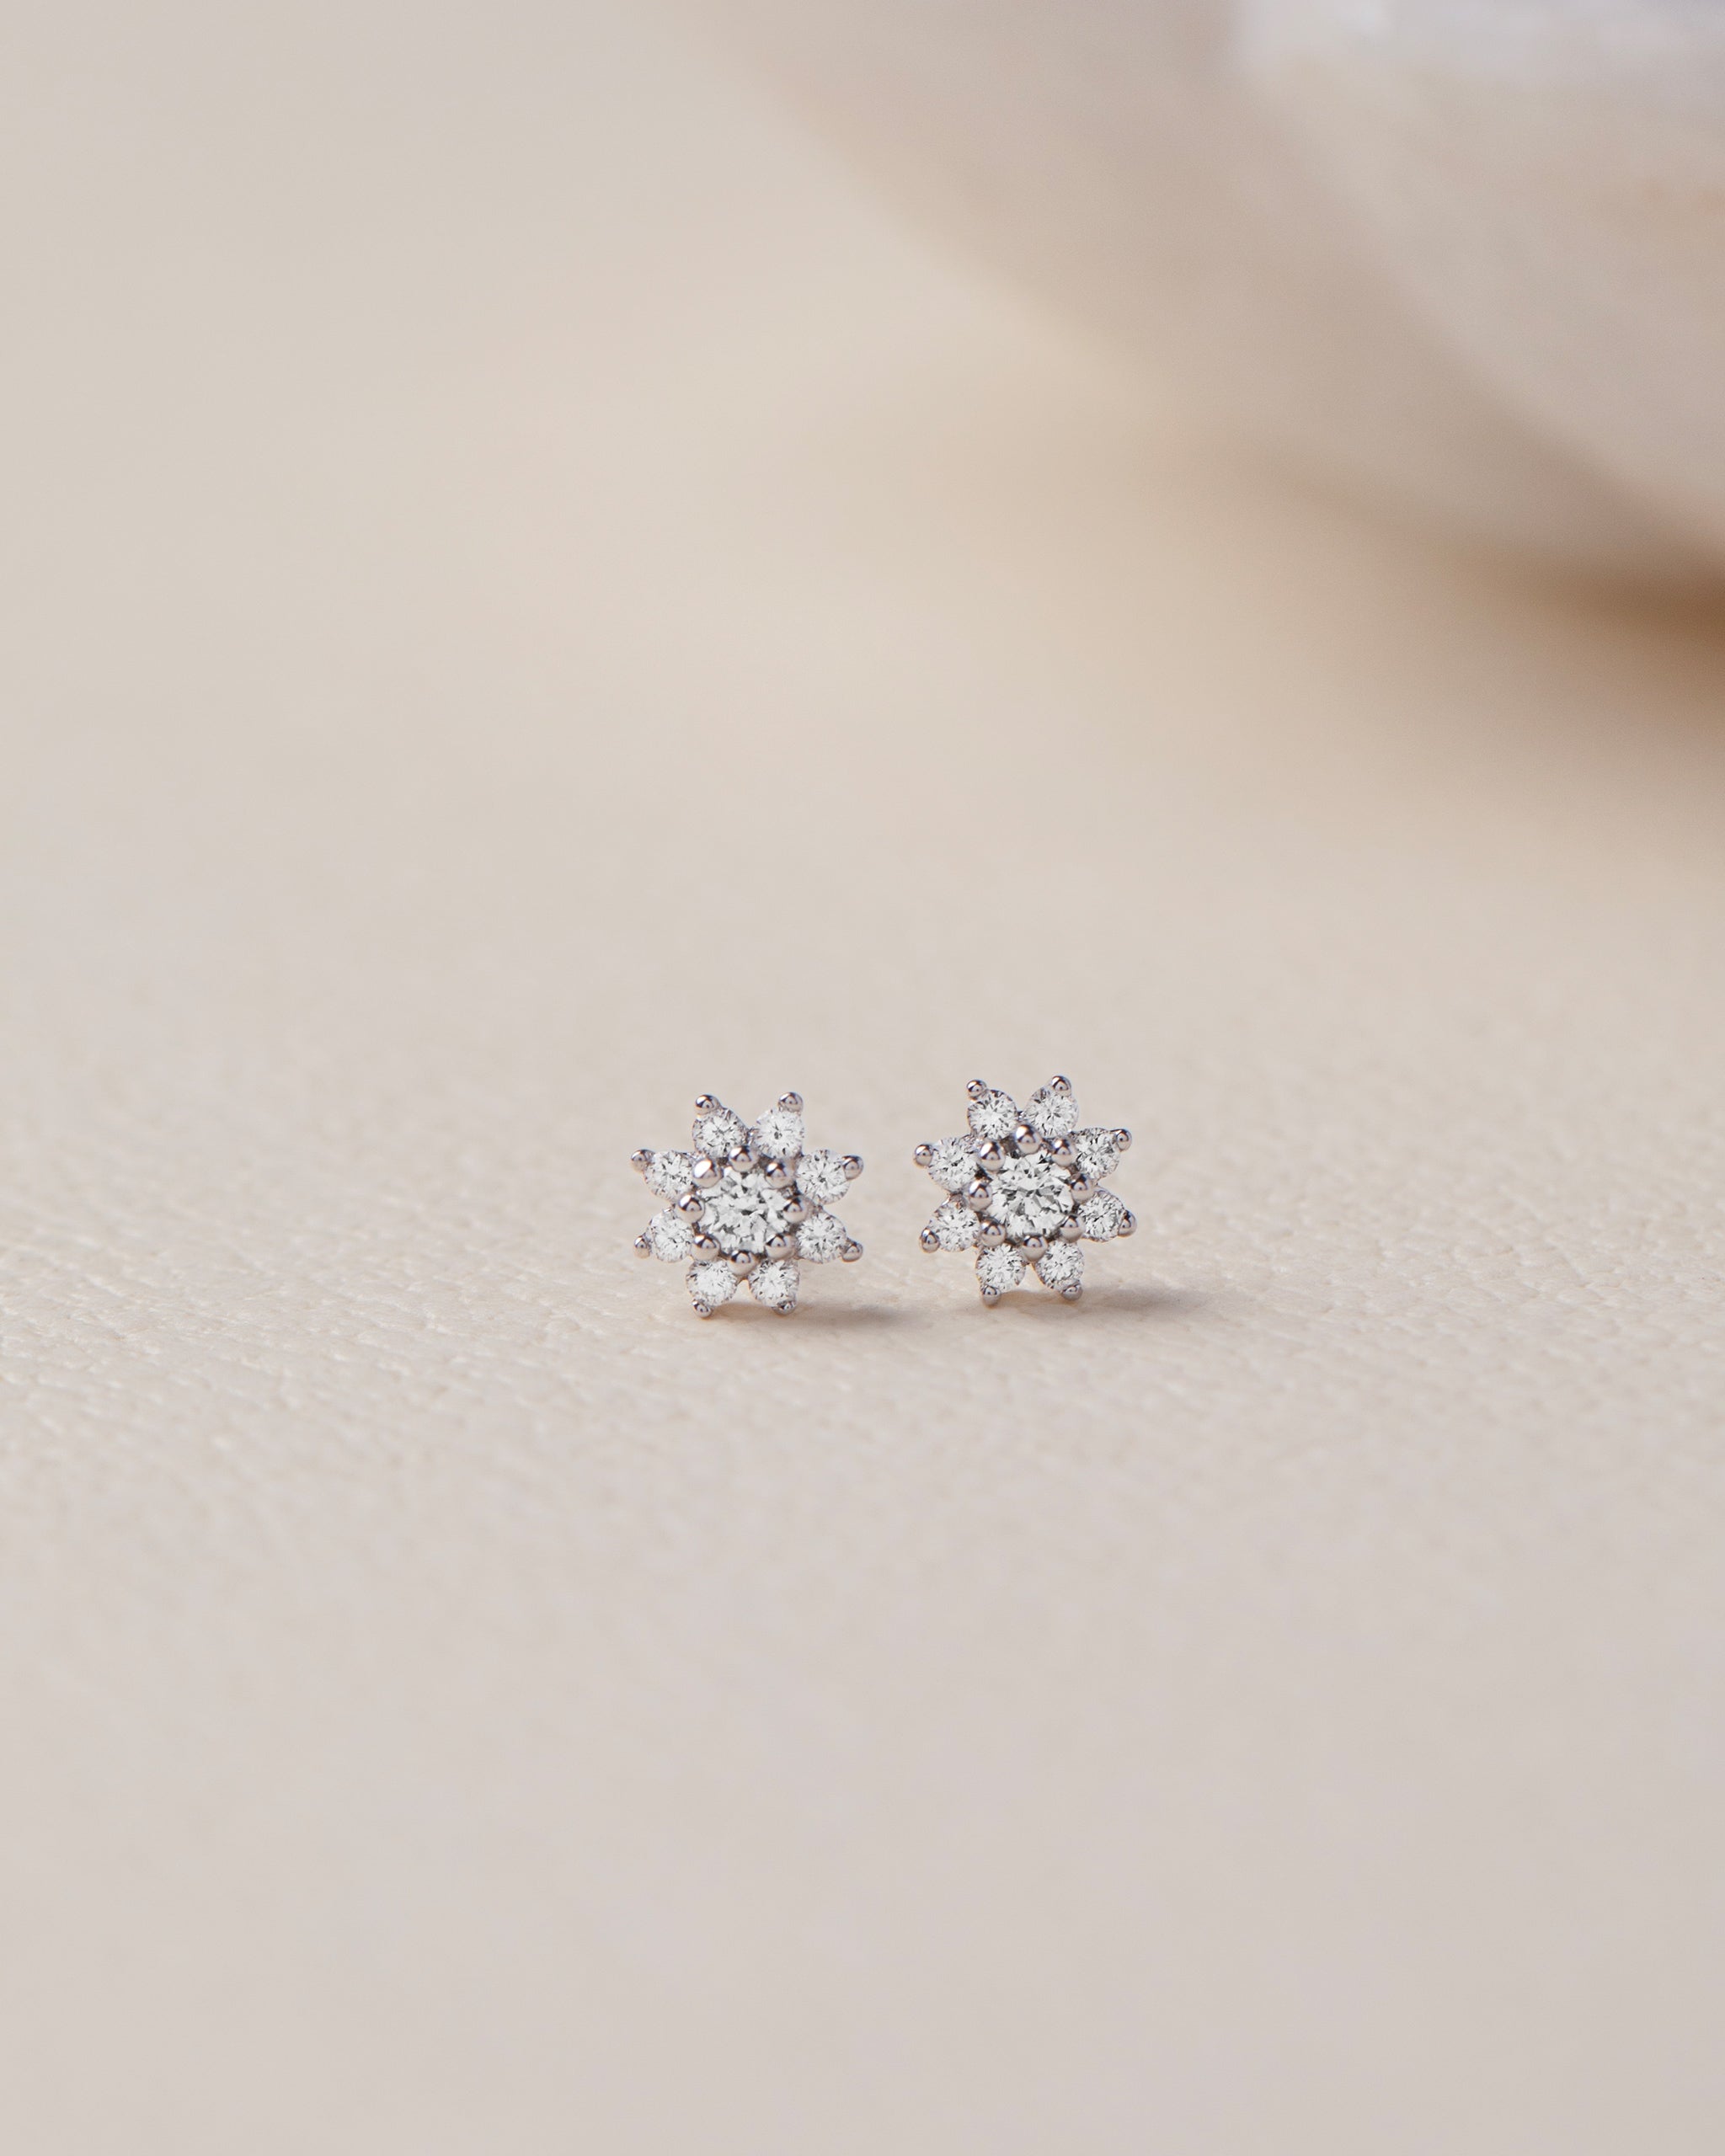 Floral Small Round Diamond Earrings